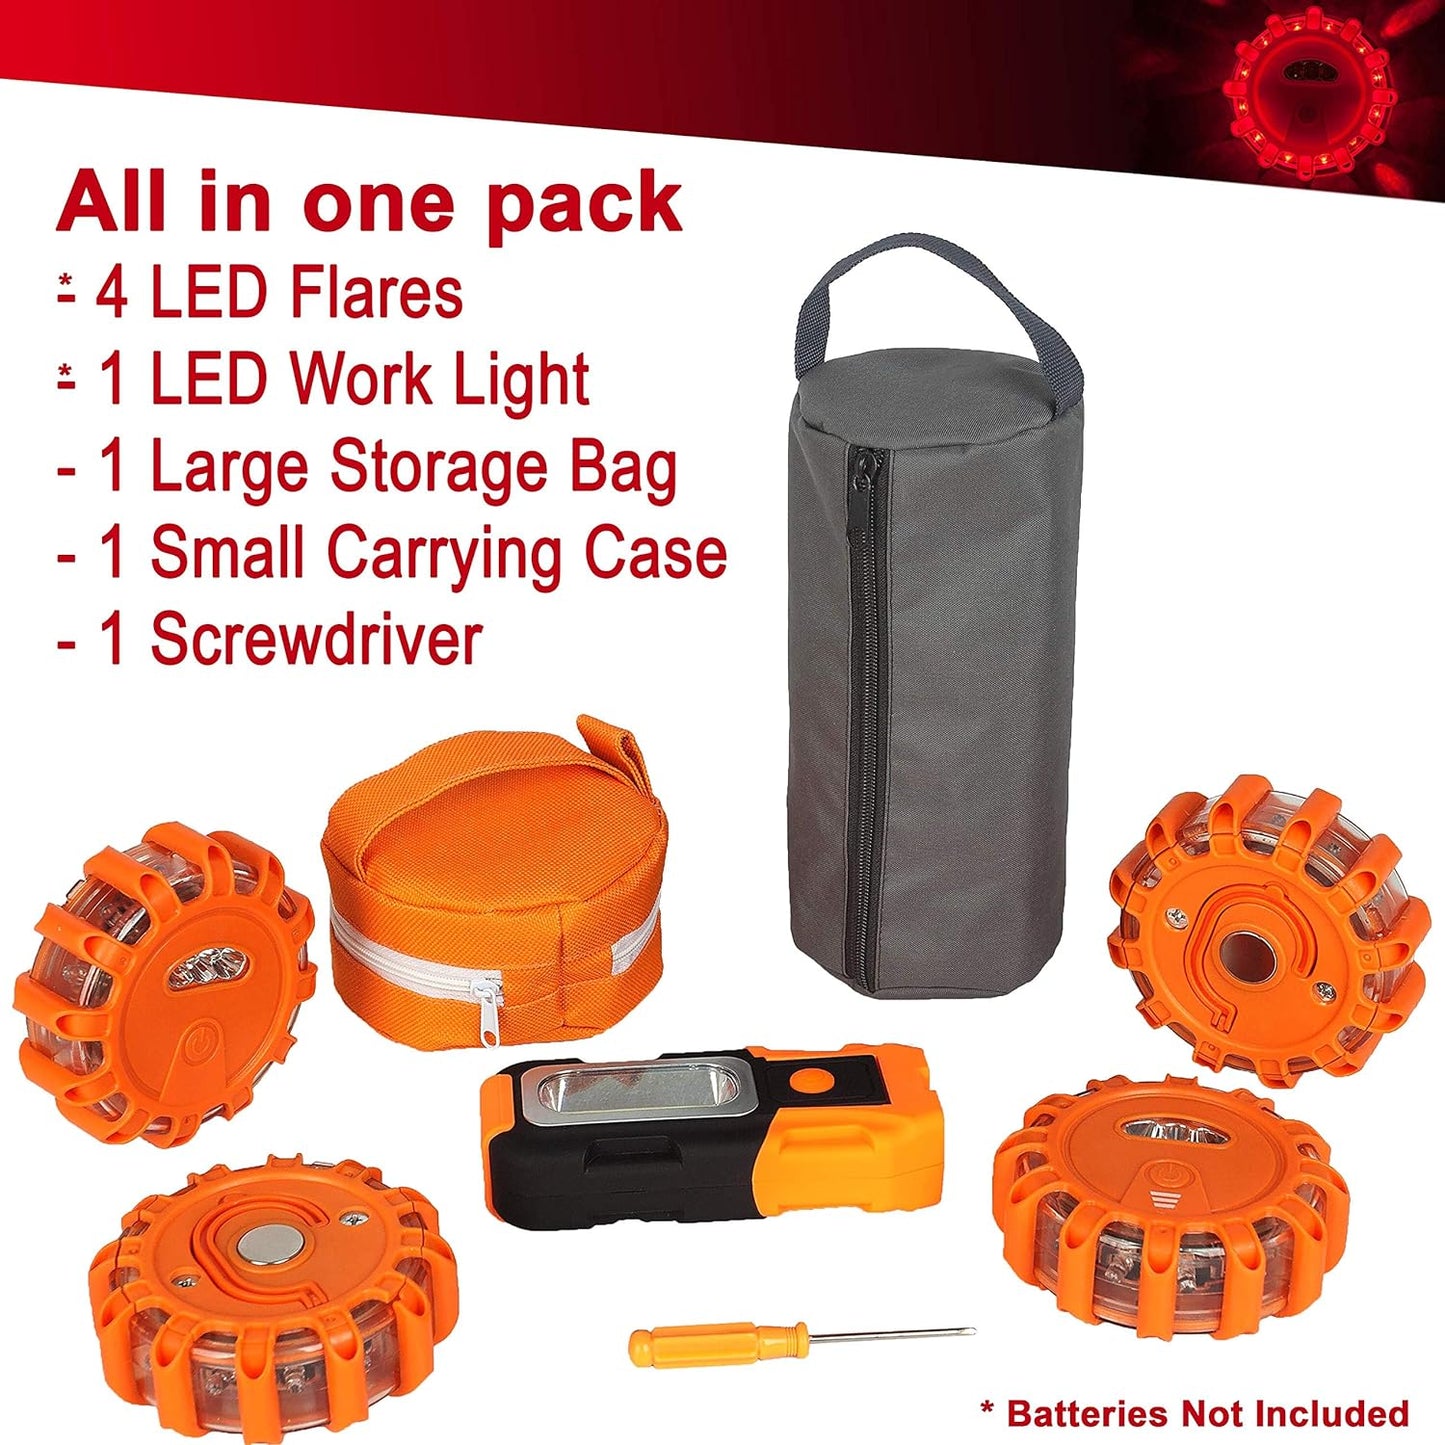 Magnetic Emergency LED Road Flares Warning Kit | Car Roadside Safety Lights | Up to 1.5 Mile Flashing View | 4 Red Light Beacon Disk & 1 Working Flashlight | For Vehicle, Boat, Truck, Flood & More